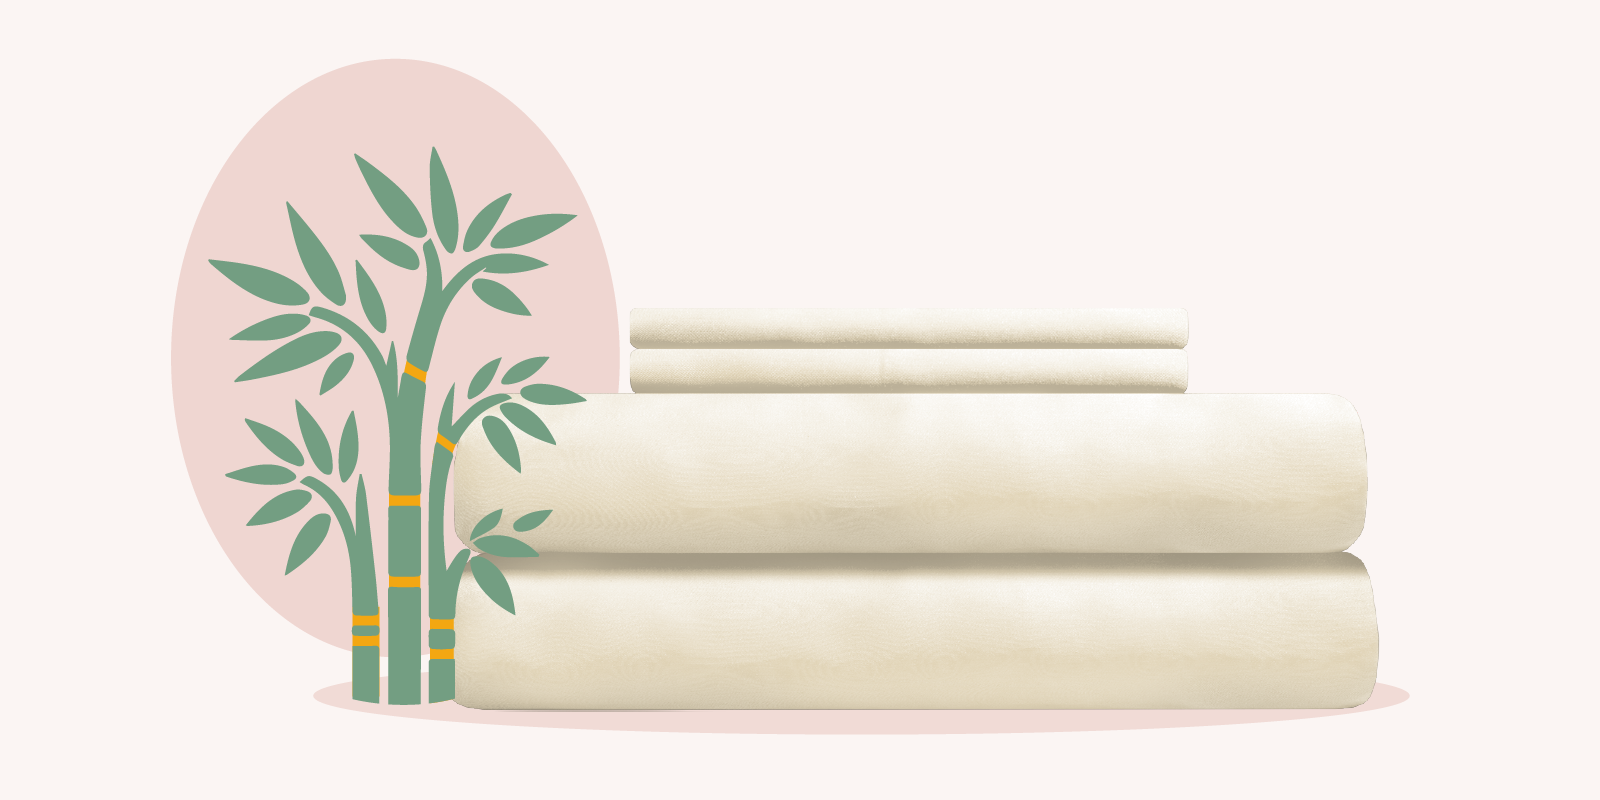 photo of bamboo sheets with illustration of bamboo plant to the left